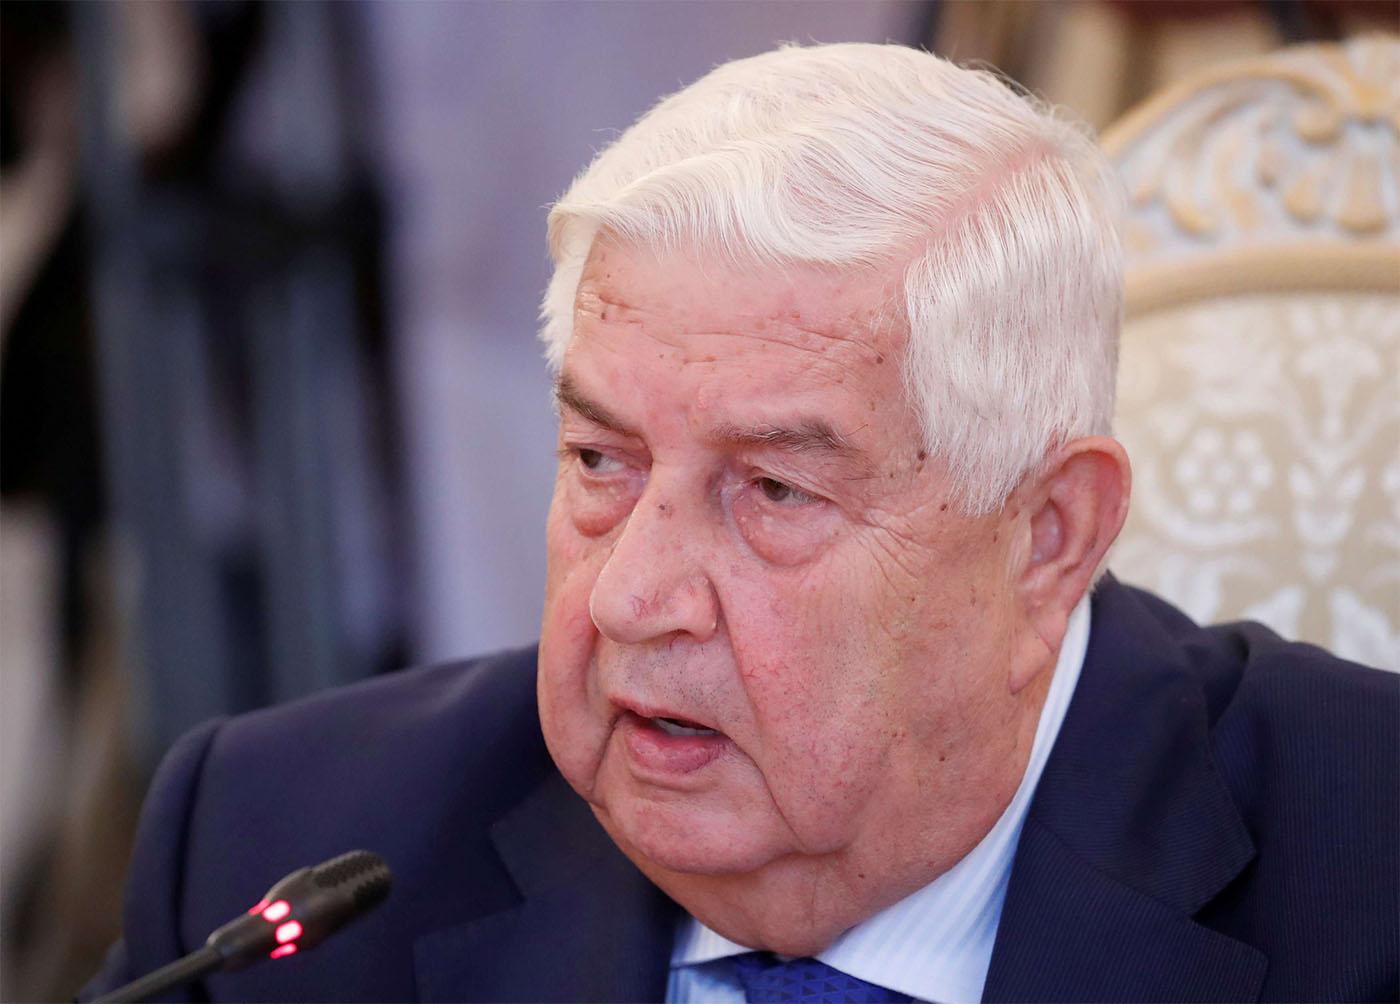 Syrian Foreign Minister Walid al-Moualem s